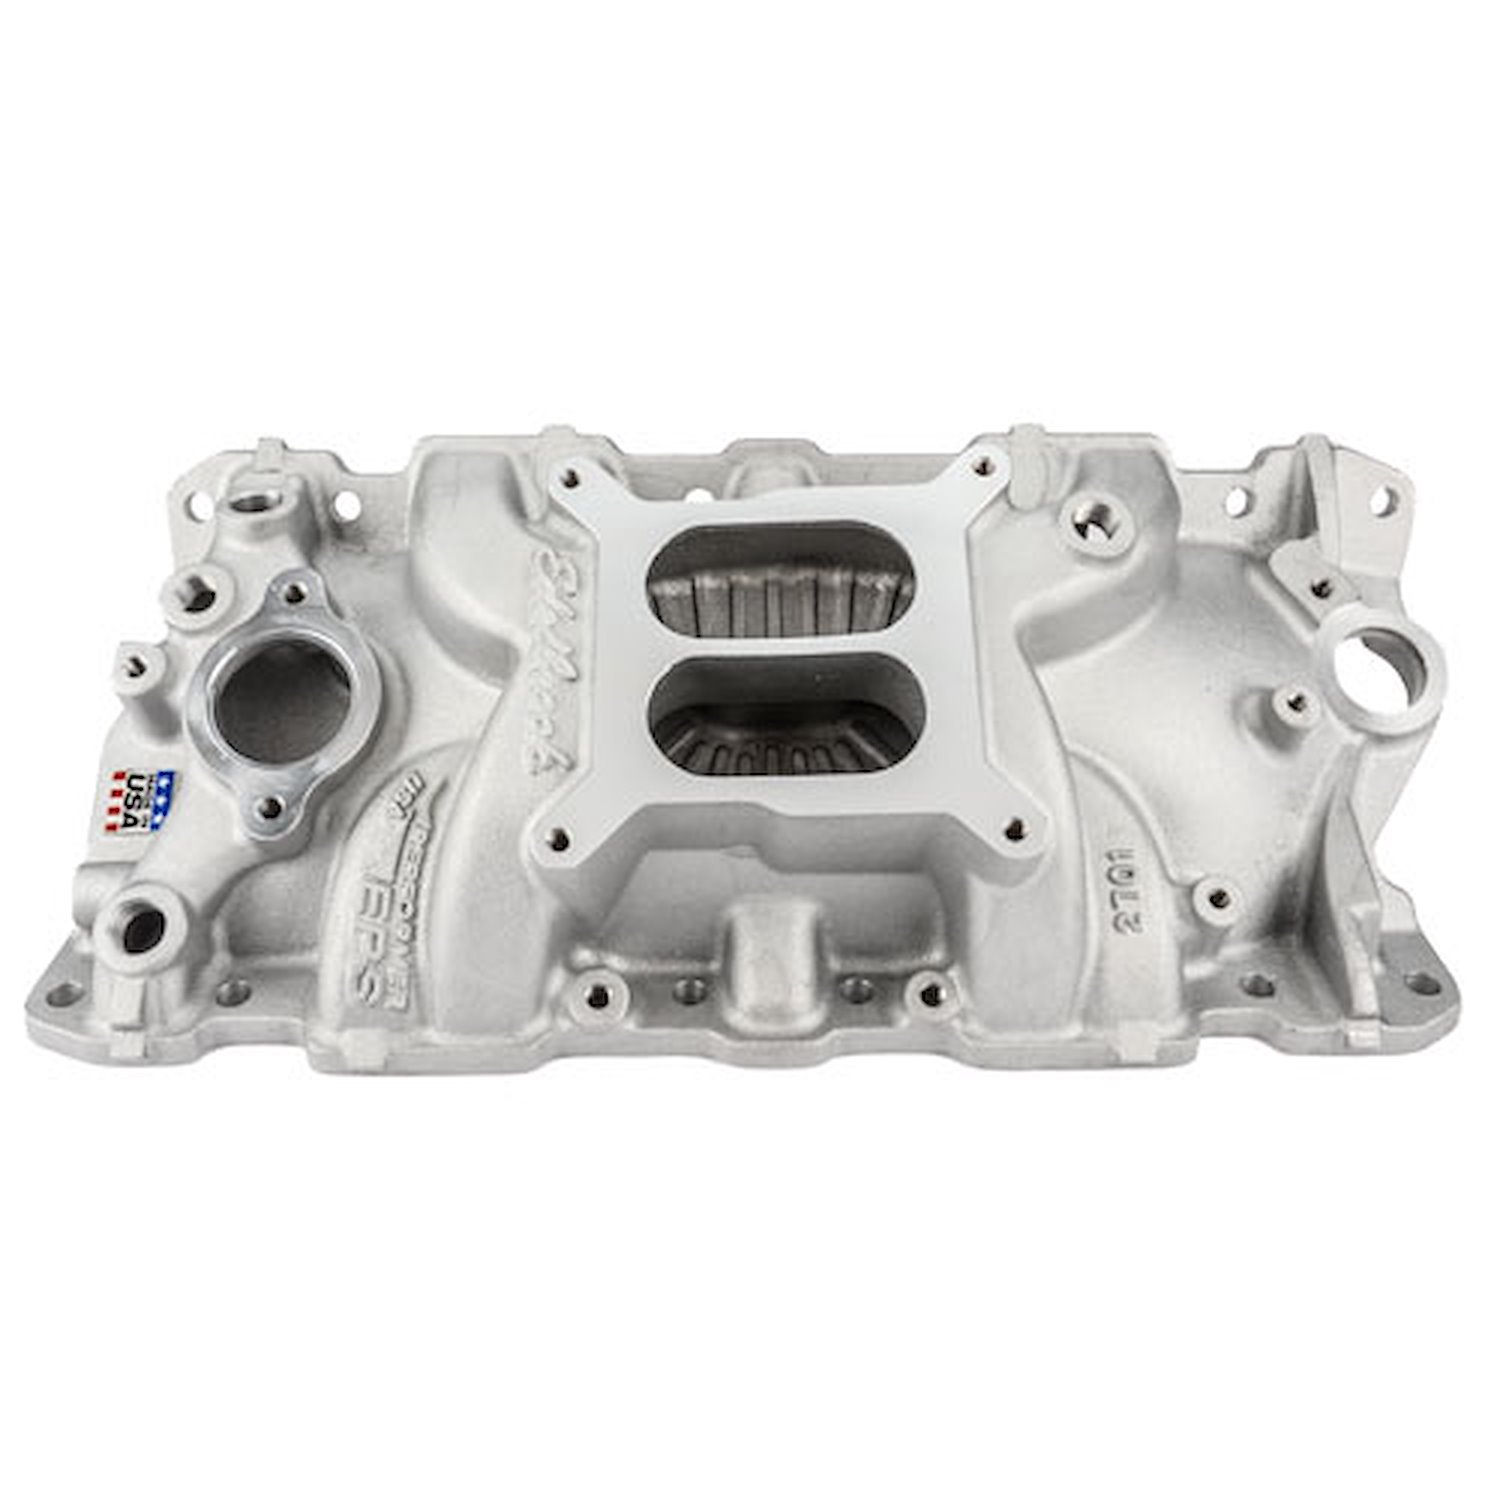 Performer EPS Intake Manifold for Small Block Chevy